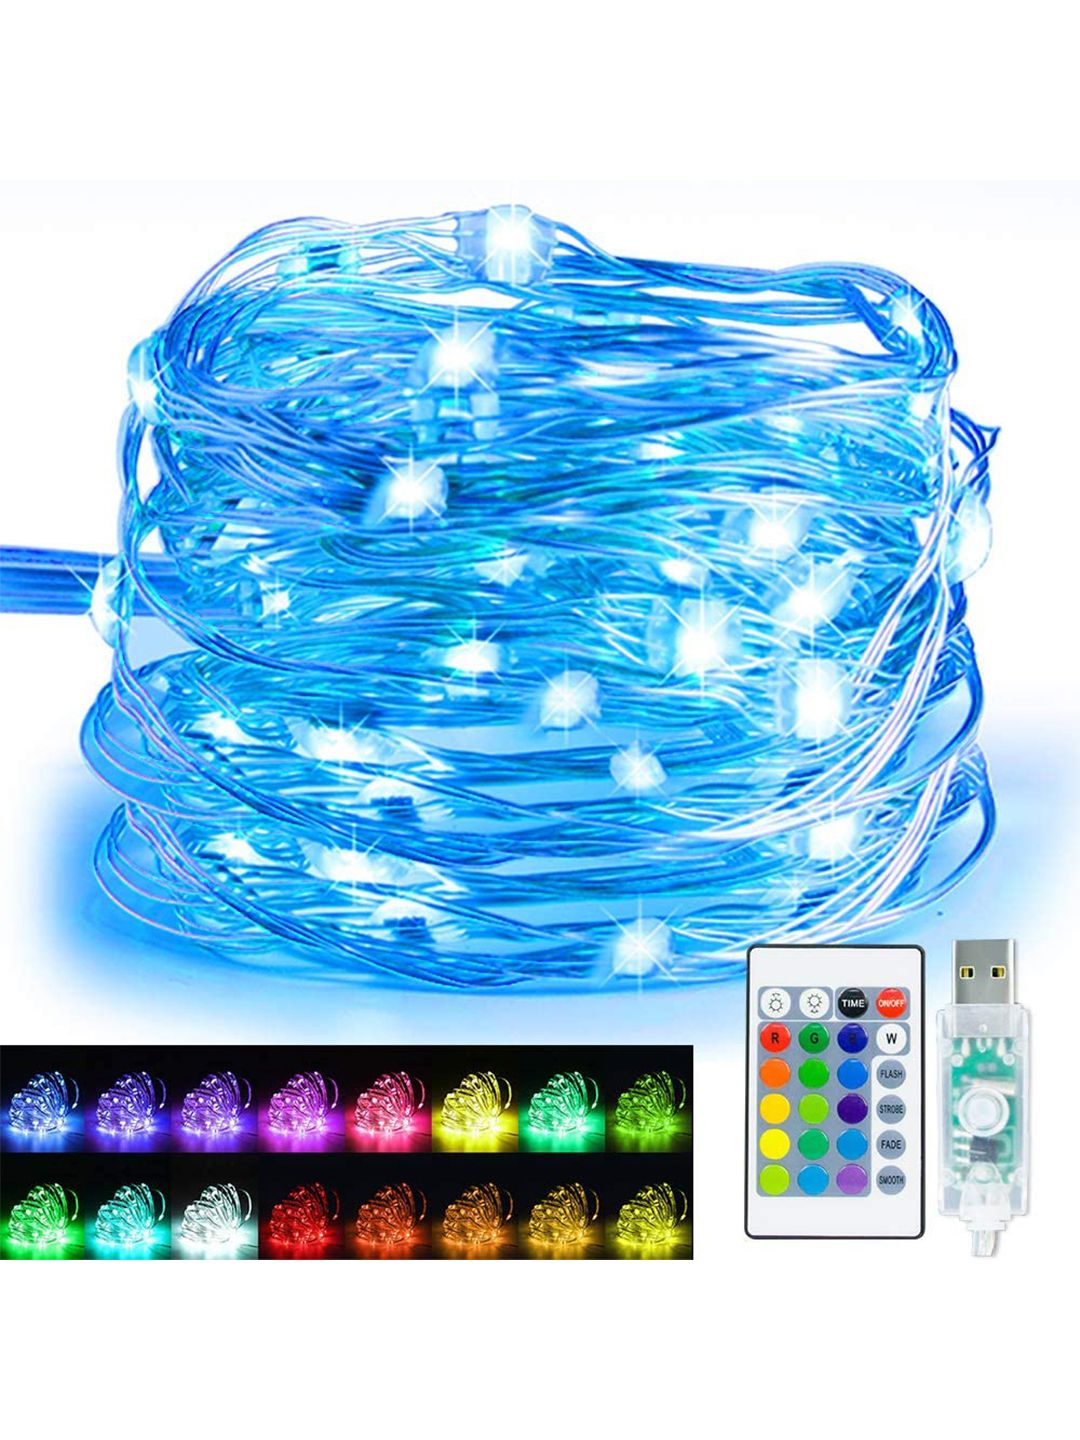 XERGY 100 LED USB Powered String Lights with Remote Controller Price in India